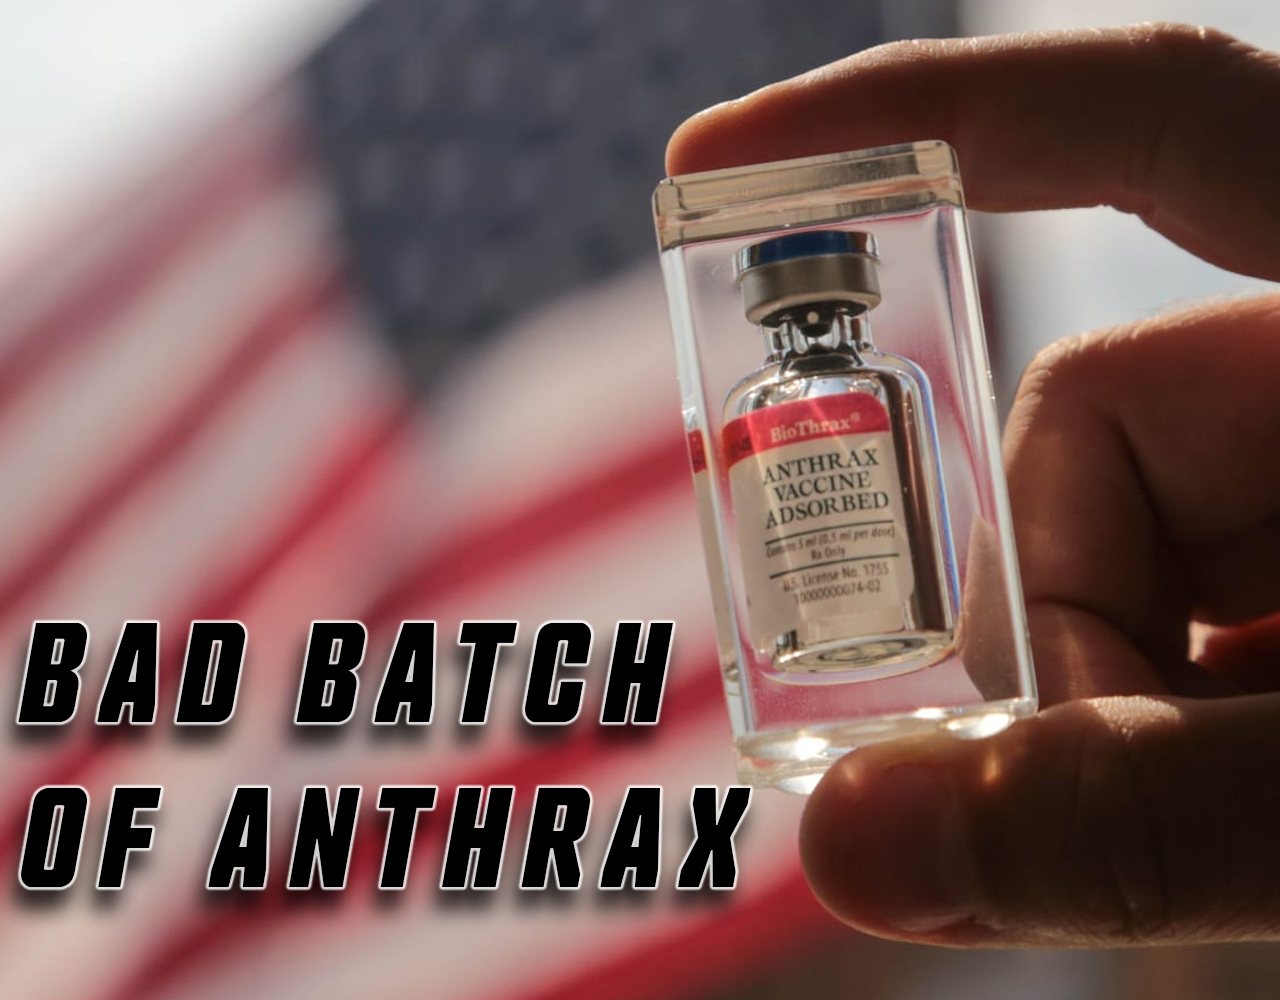 Email states 100% VA rating for bad batches of Anthrax shot